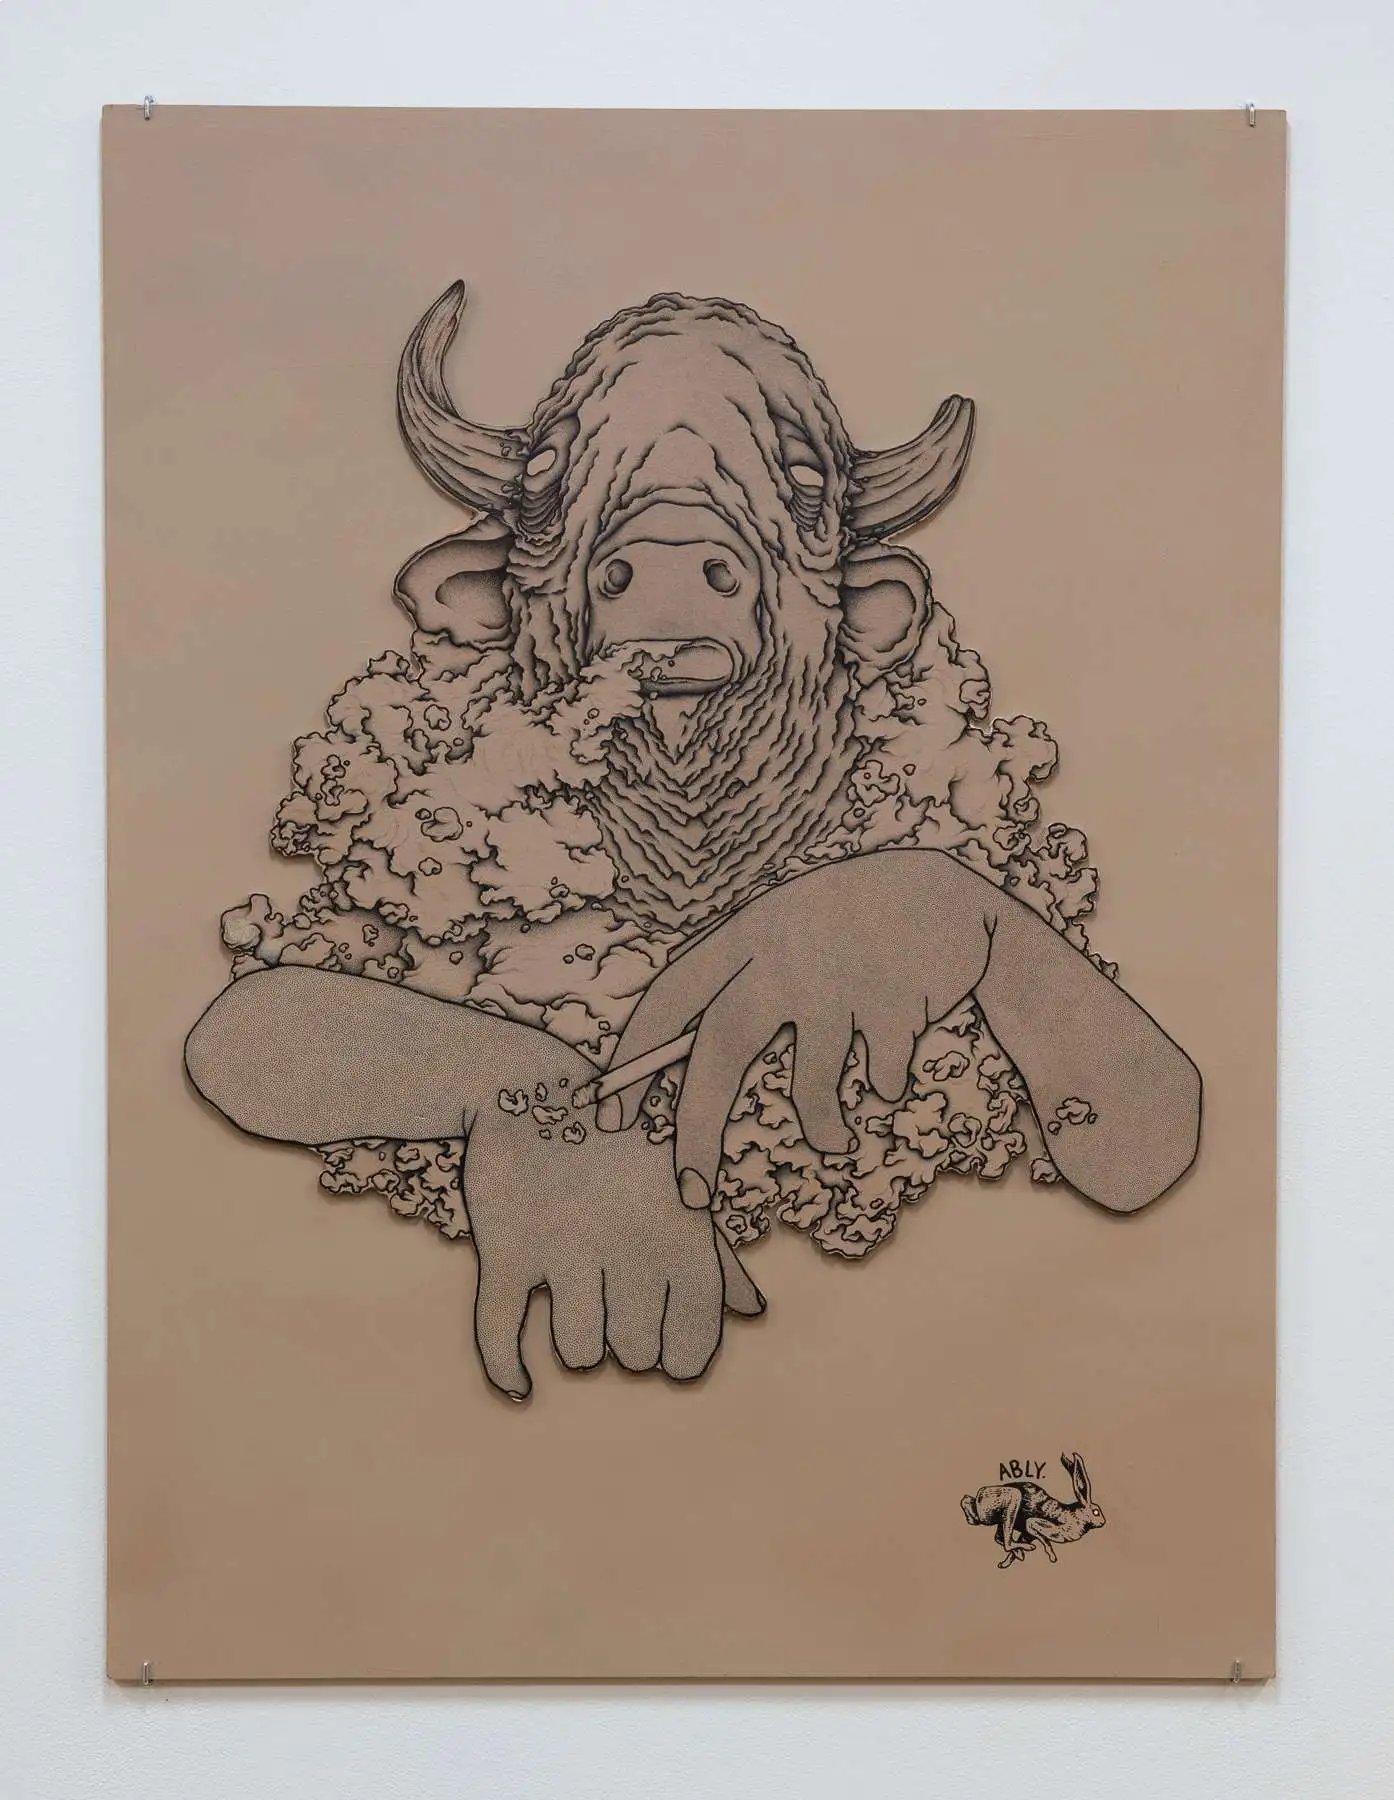 An art exhibition showing a bull with human hands smoking and being surrounded with smoking by puffing